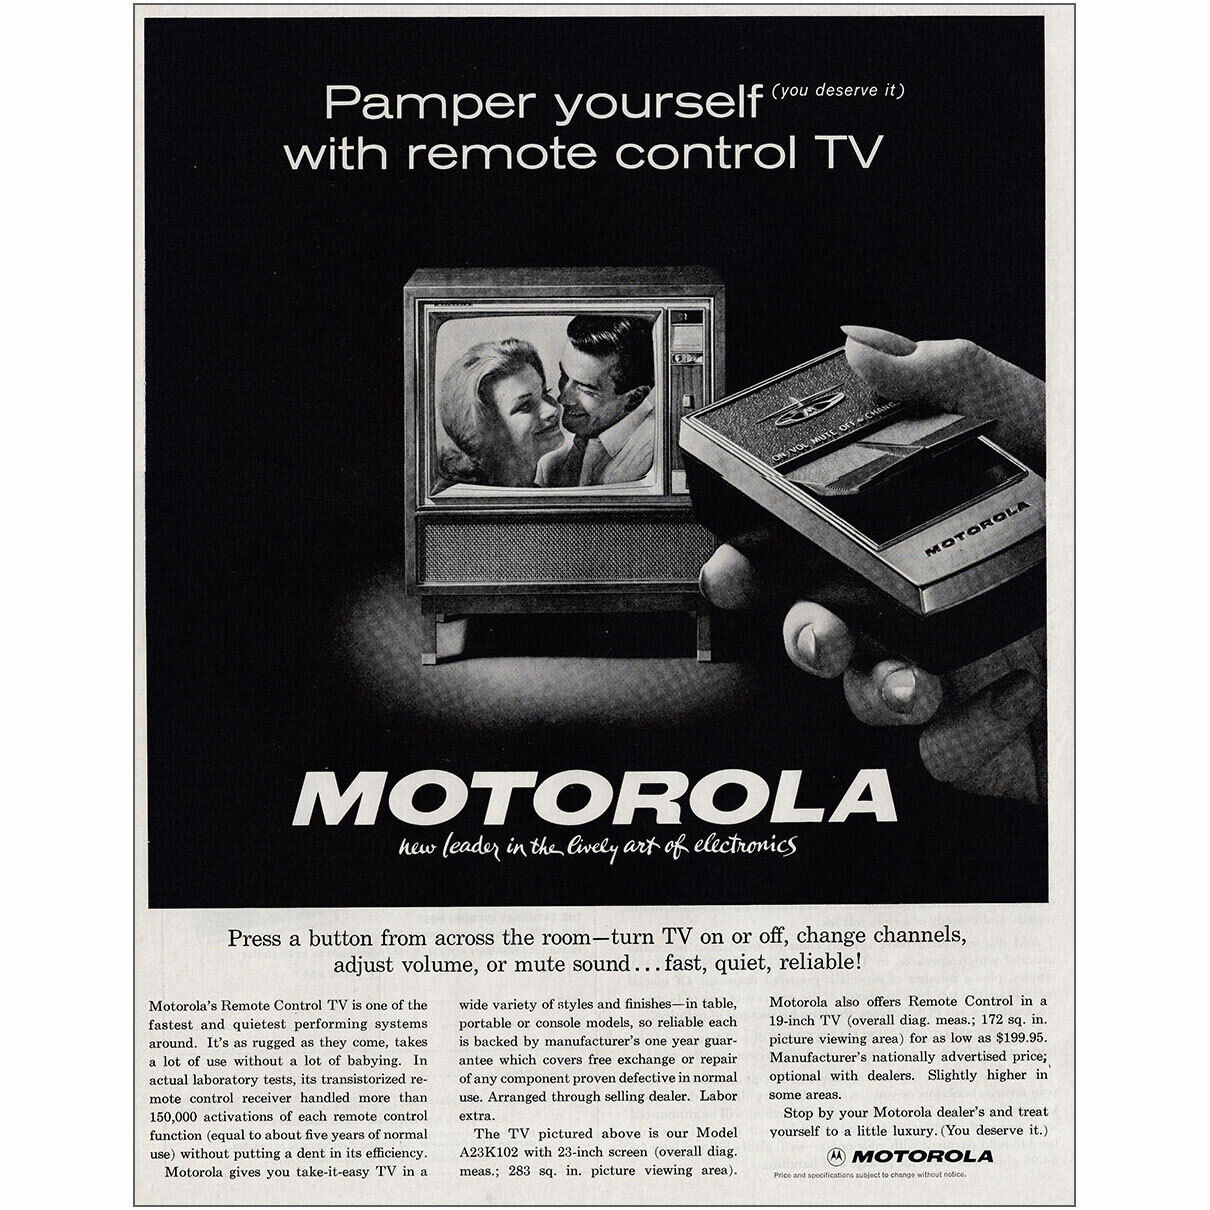 1962 Motorola: Pamper Yourself With Remote Control TV Vintage Print Ad